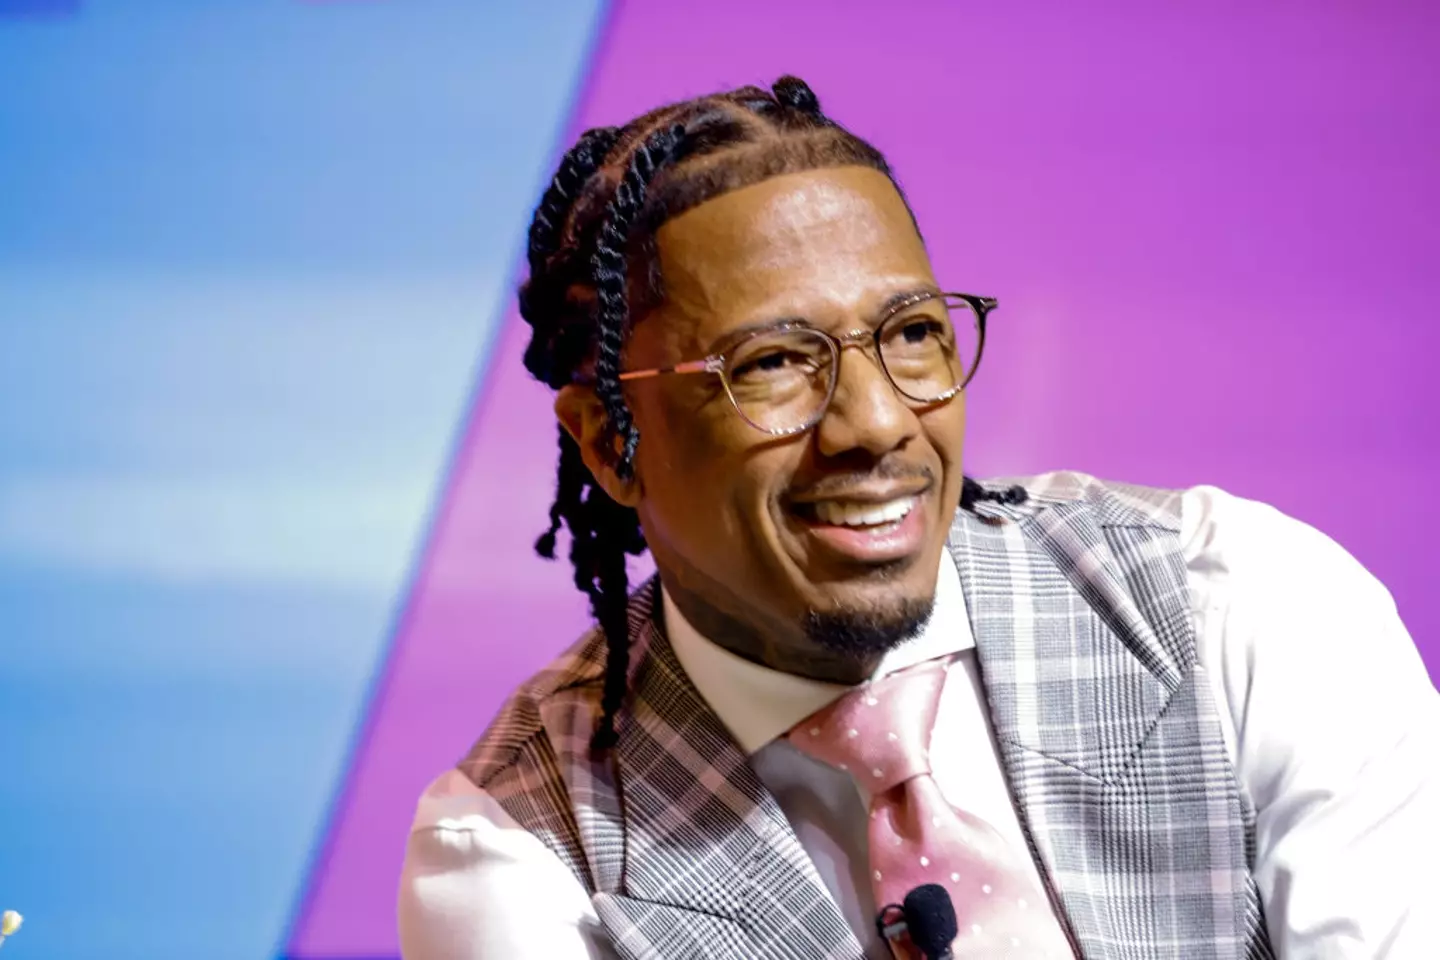 Nick Cannon posted the video to Instagram. (Leon Bennett/Getty Images for Amazon)